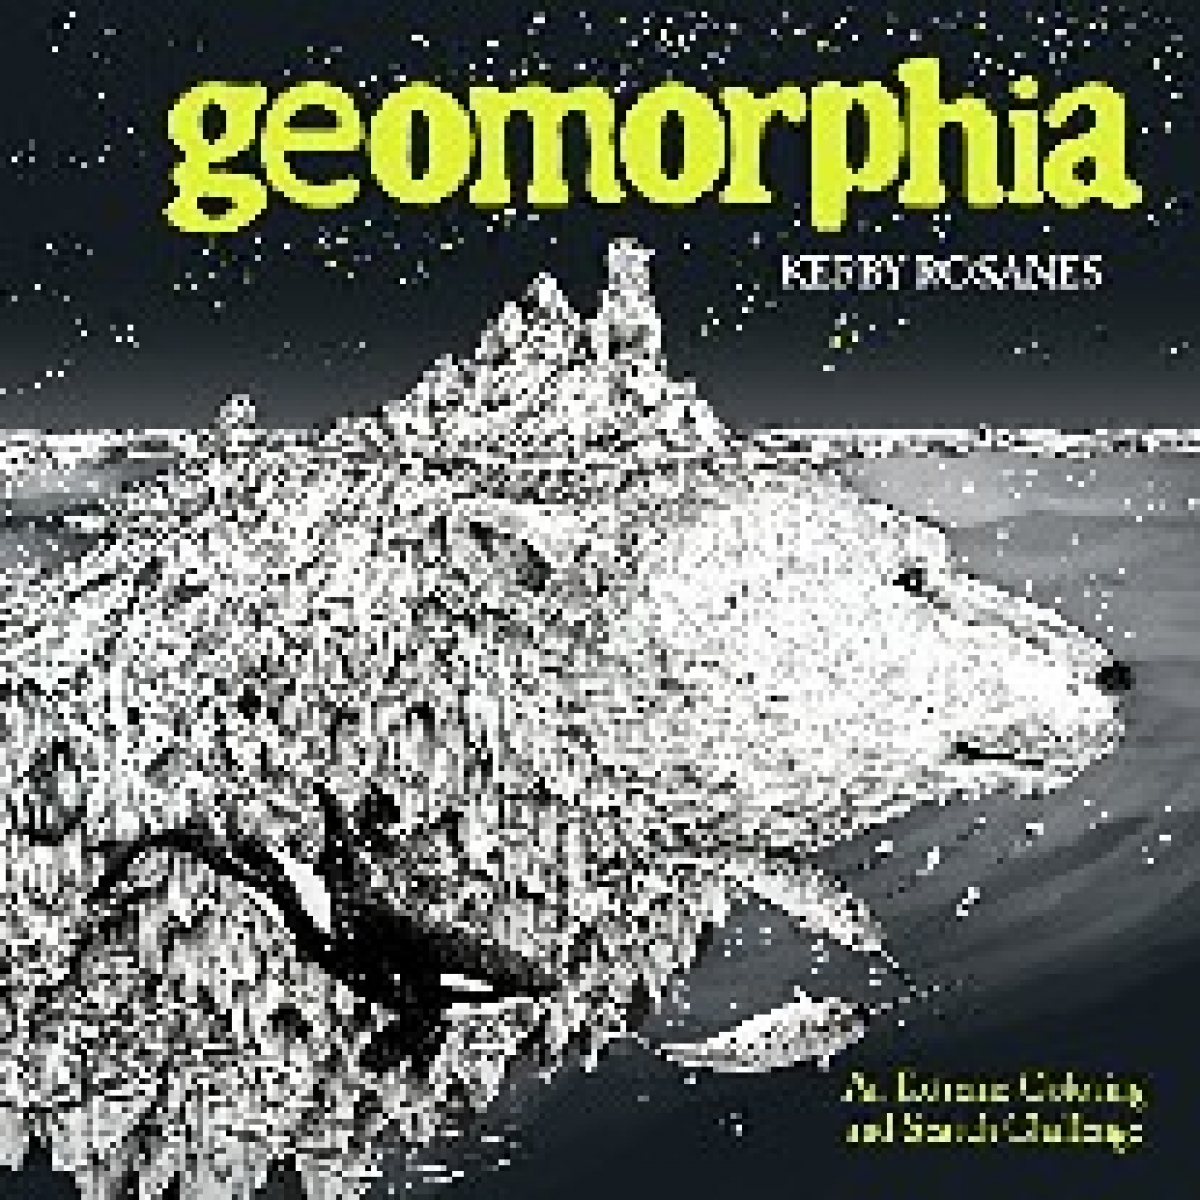 Rosanes Kerby Geomorphia: An Extreme Coloring and Search Challenge 